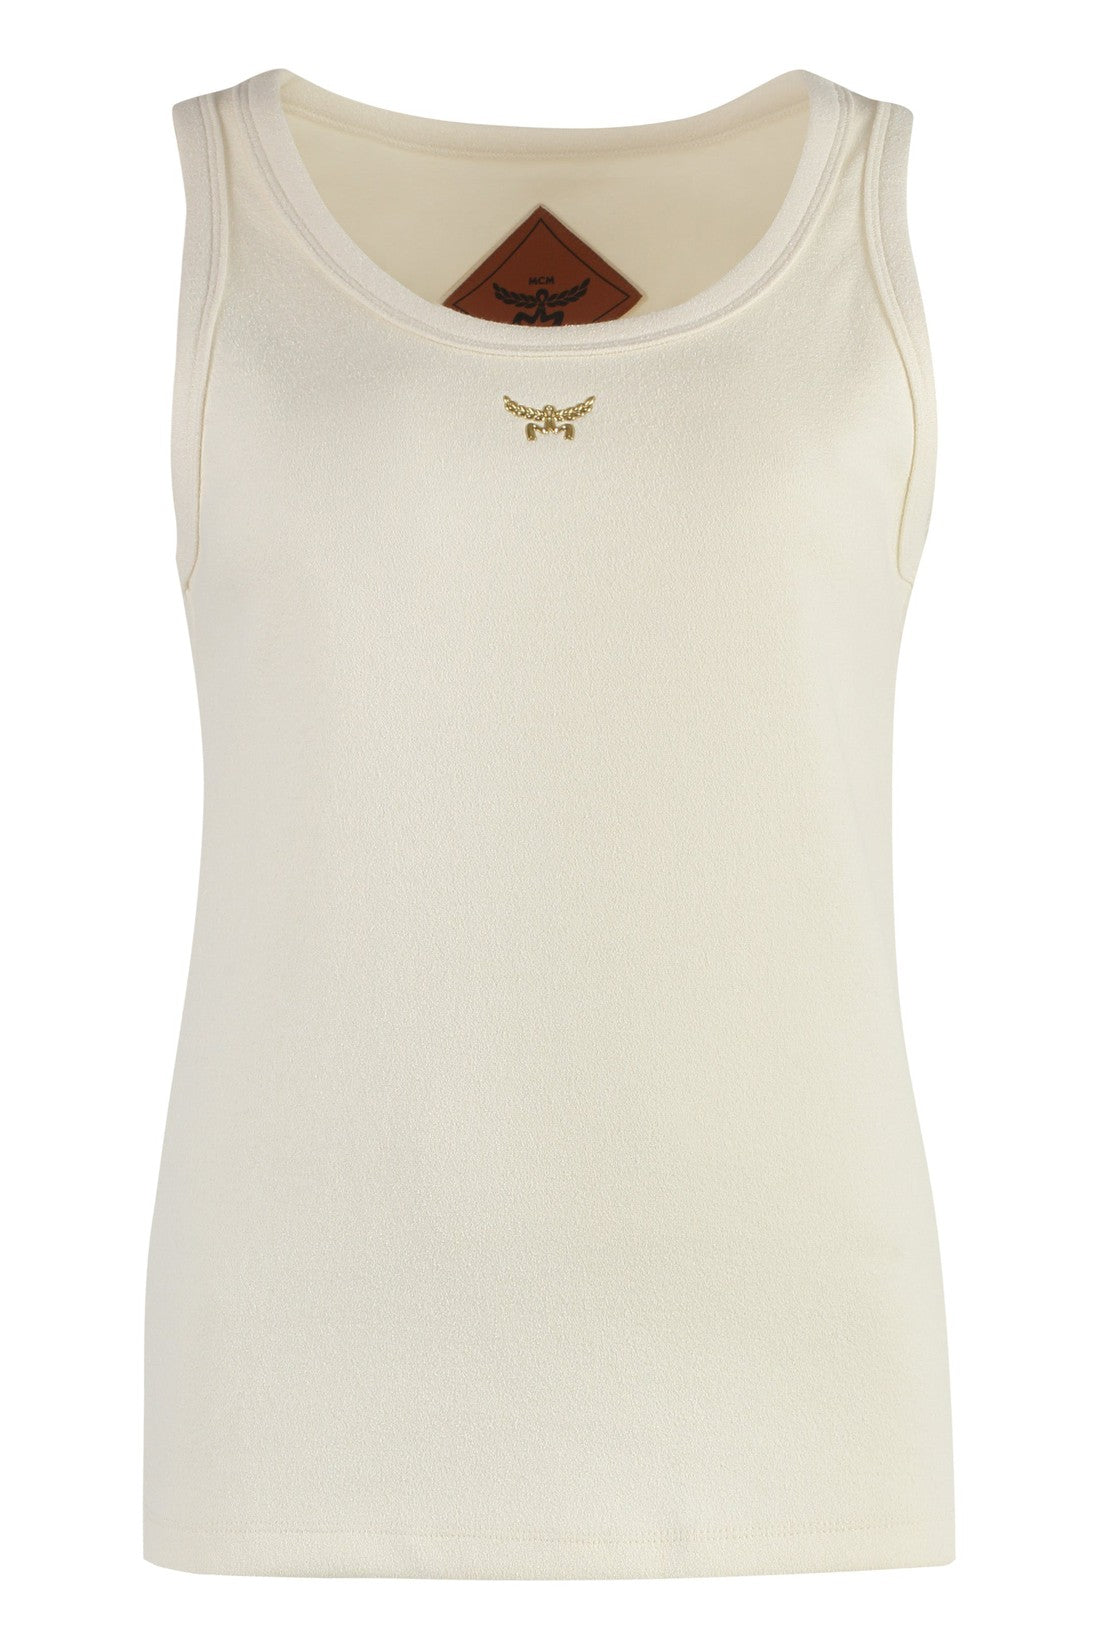 MCM-OUTLET-SALE-Knitted tank top-ARCHIVIST